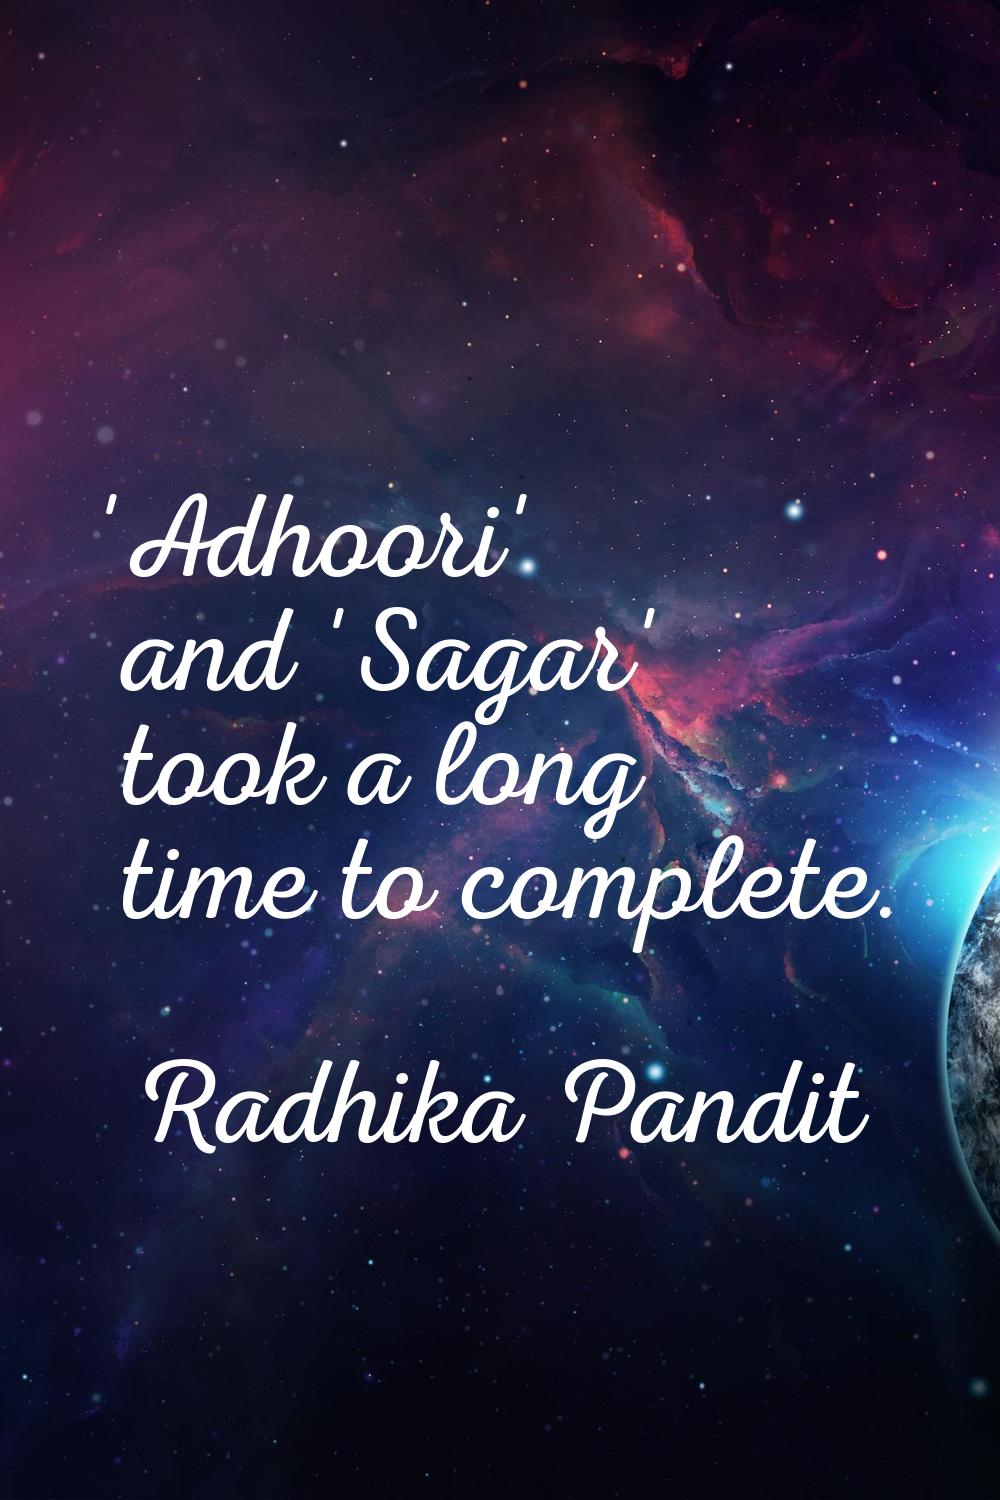 'Adhoori' and 'Sagar' took a long time to complete.